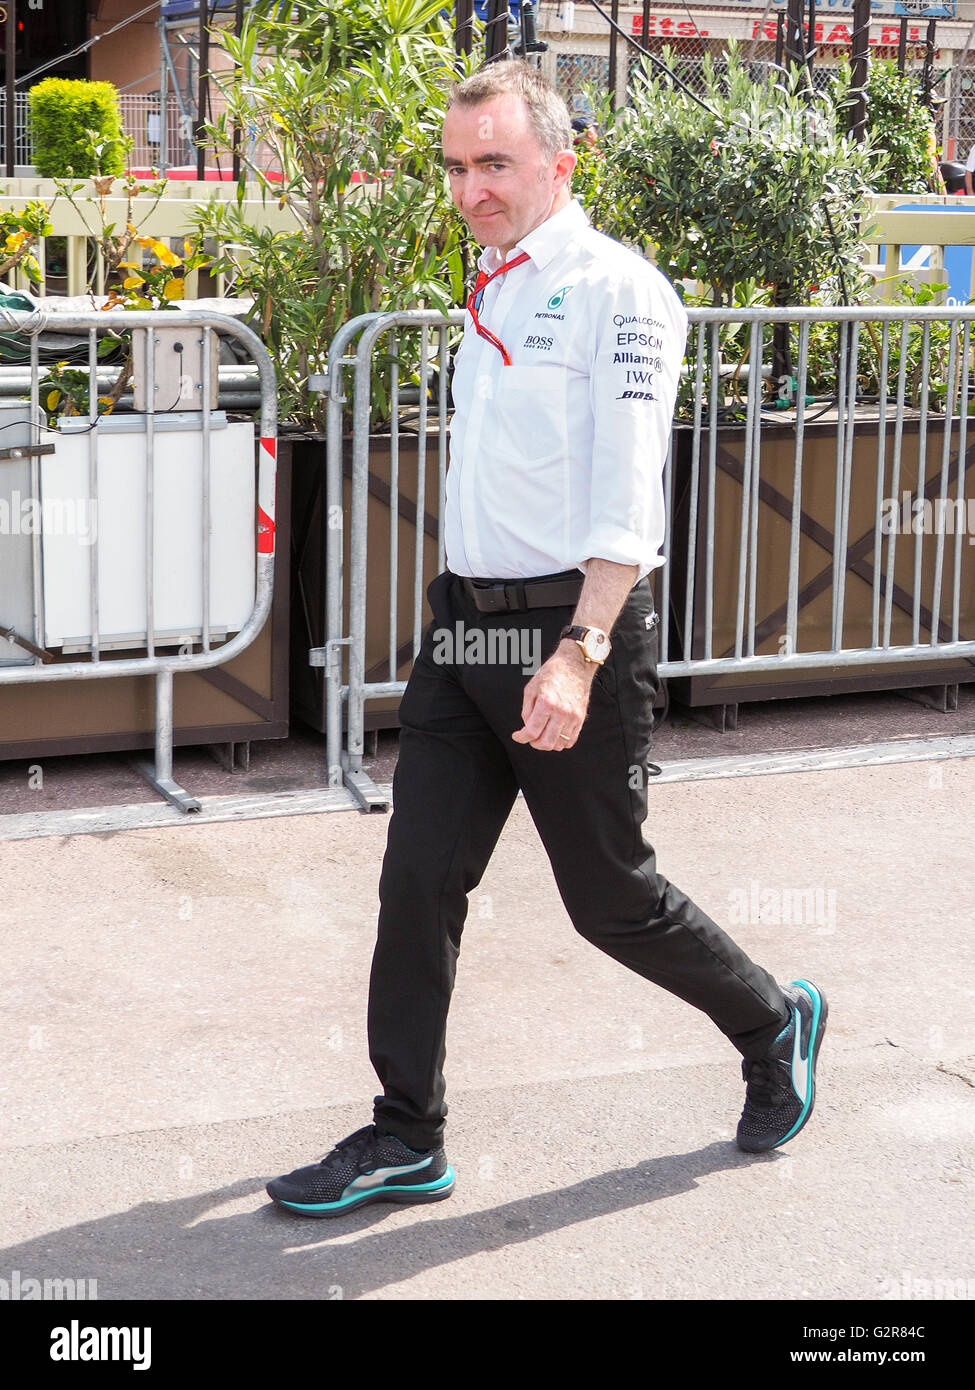 Monaco, France, May 27th 2016: Paddy Lowe, motor racing engineer and executive director of Mercedes Formula One team. Stock Photo